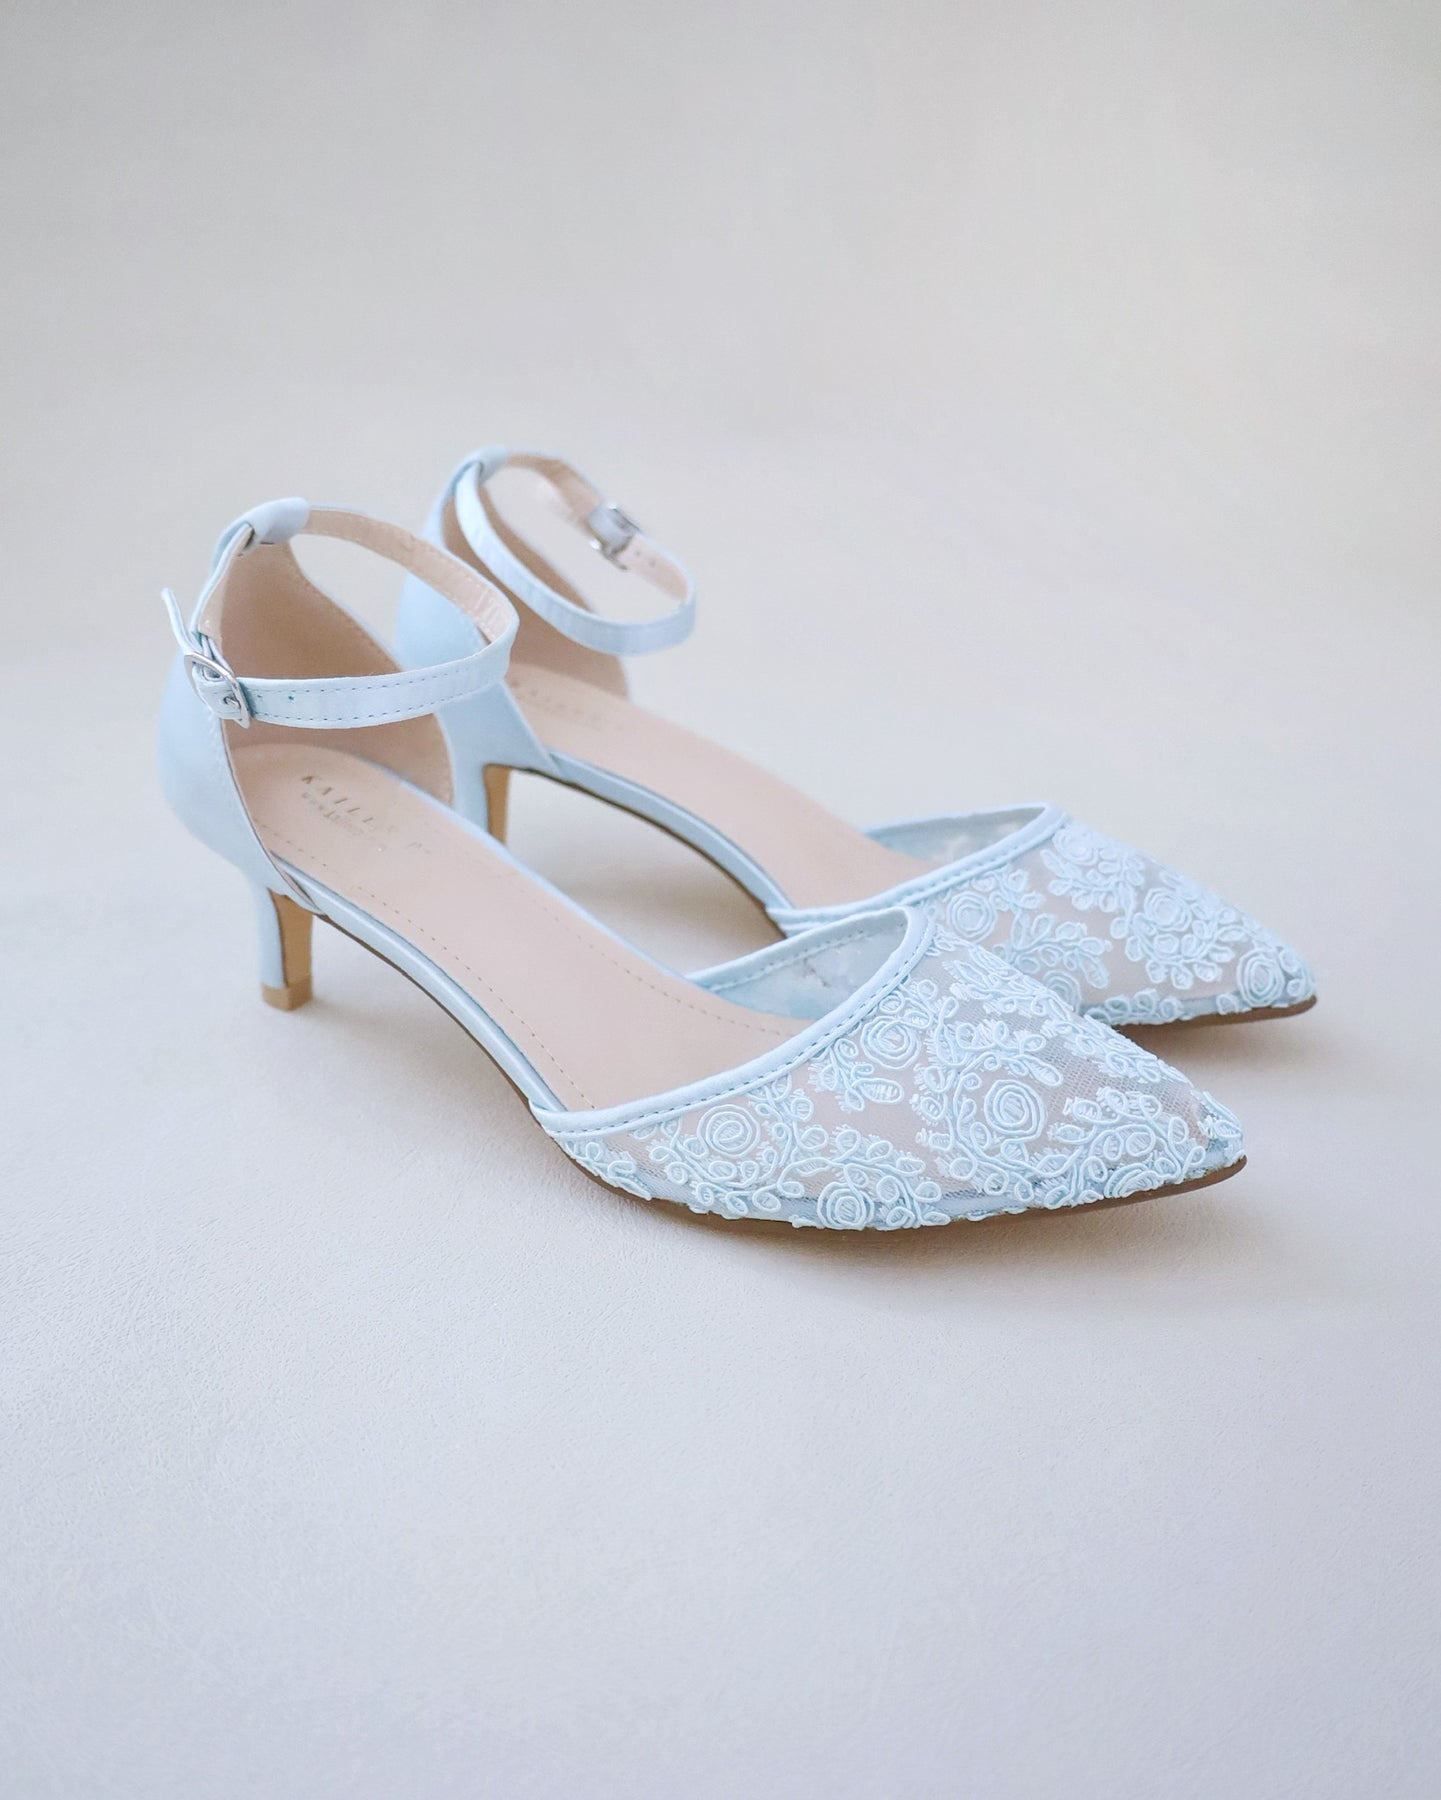 Bridal Shoe Roundup for 2020